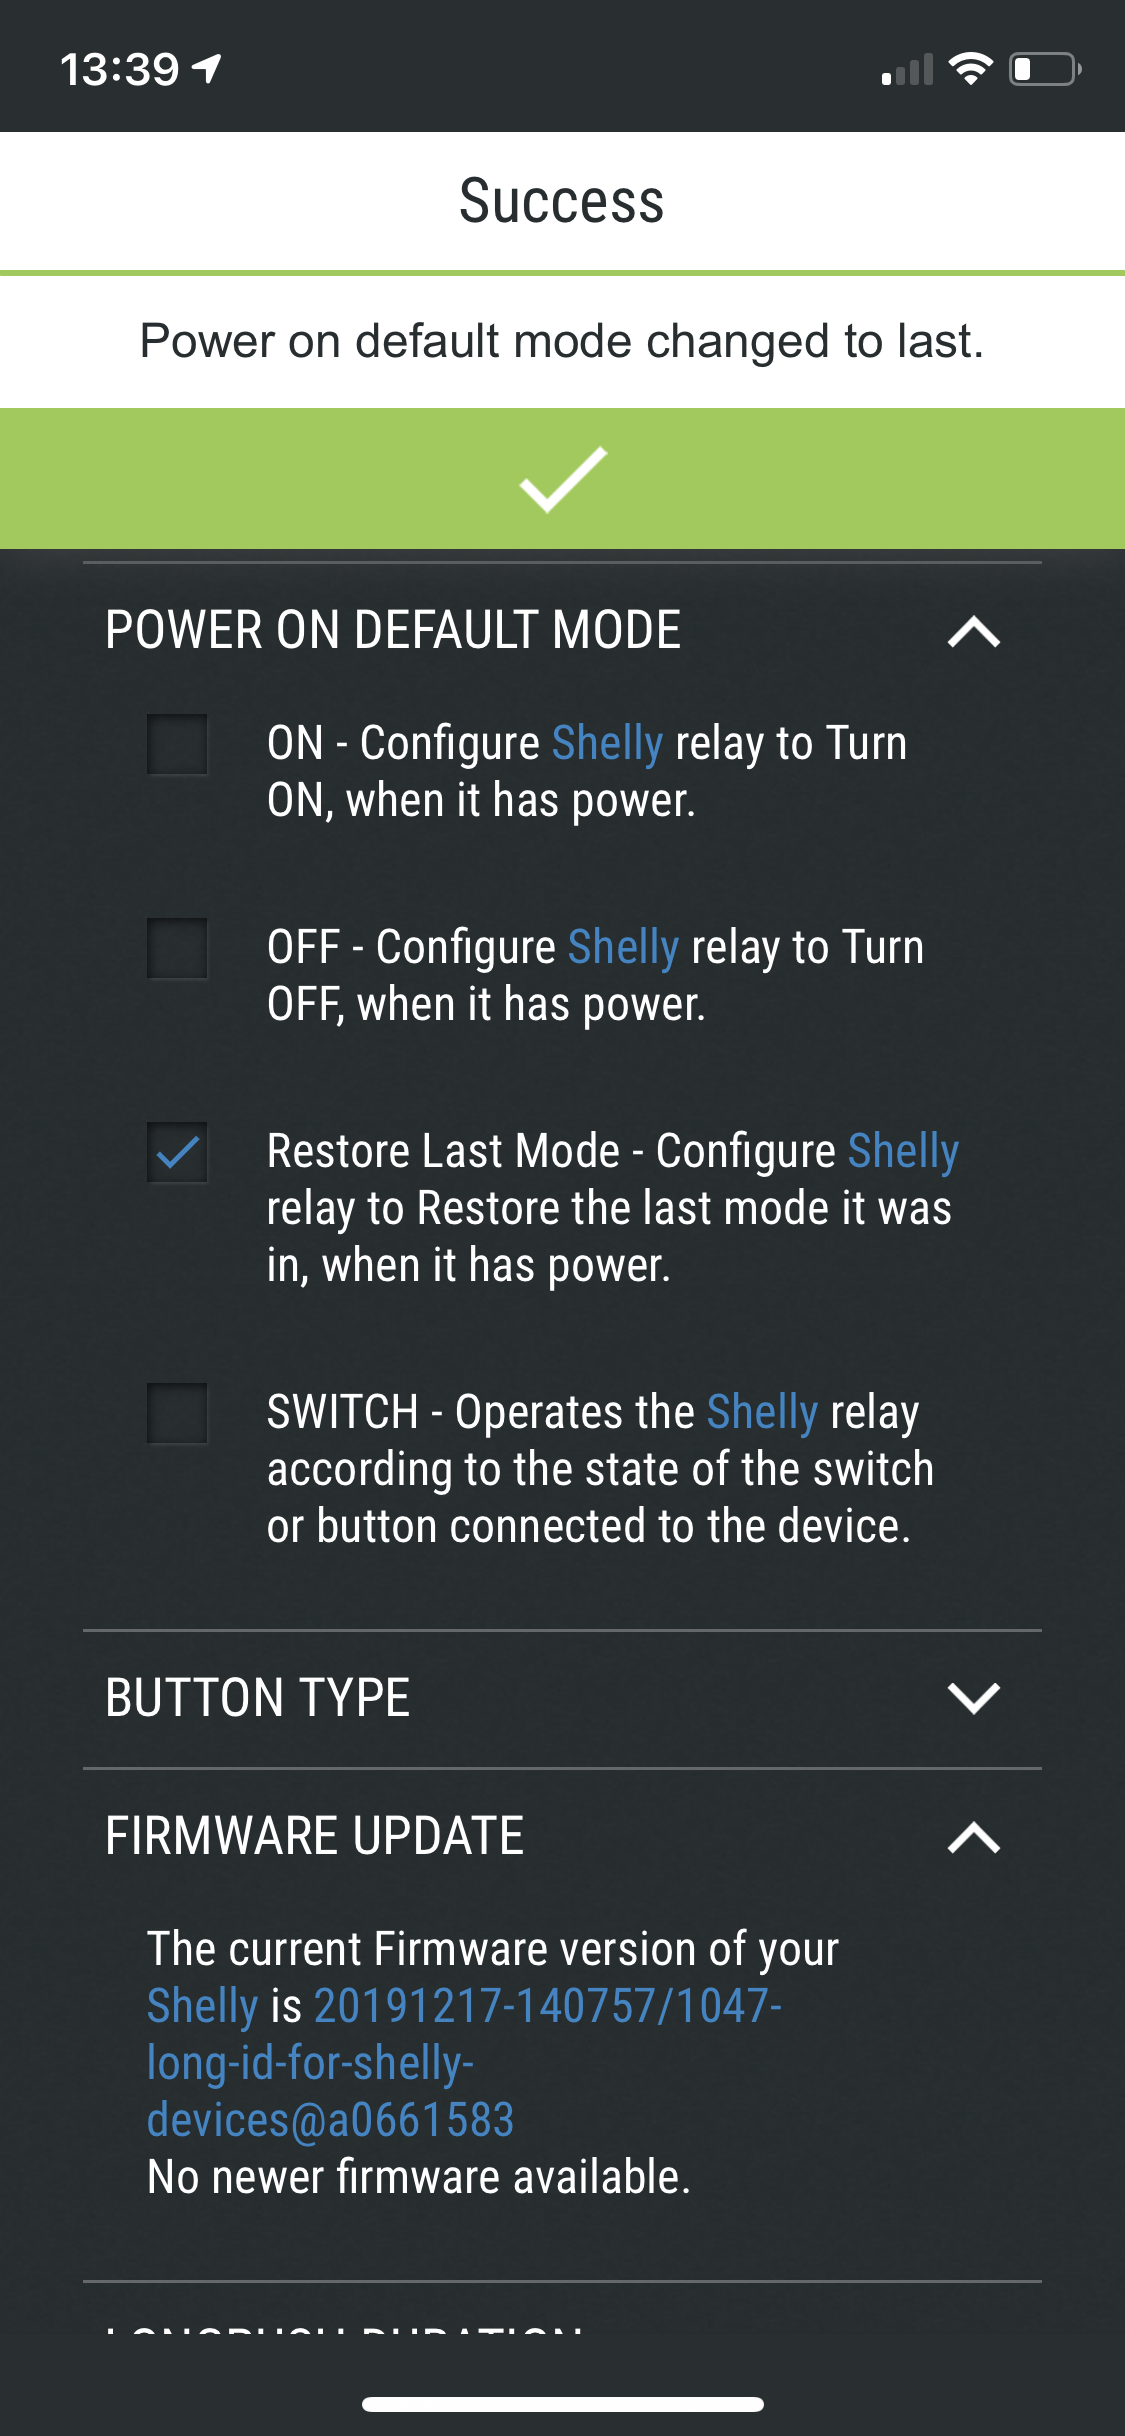 Set "Power on default mode" to "Toggle Switch"